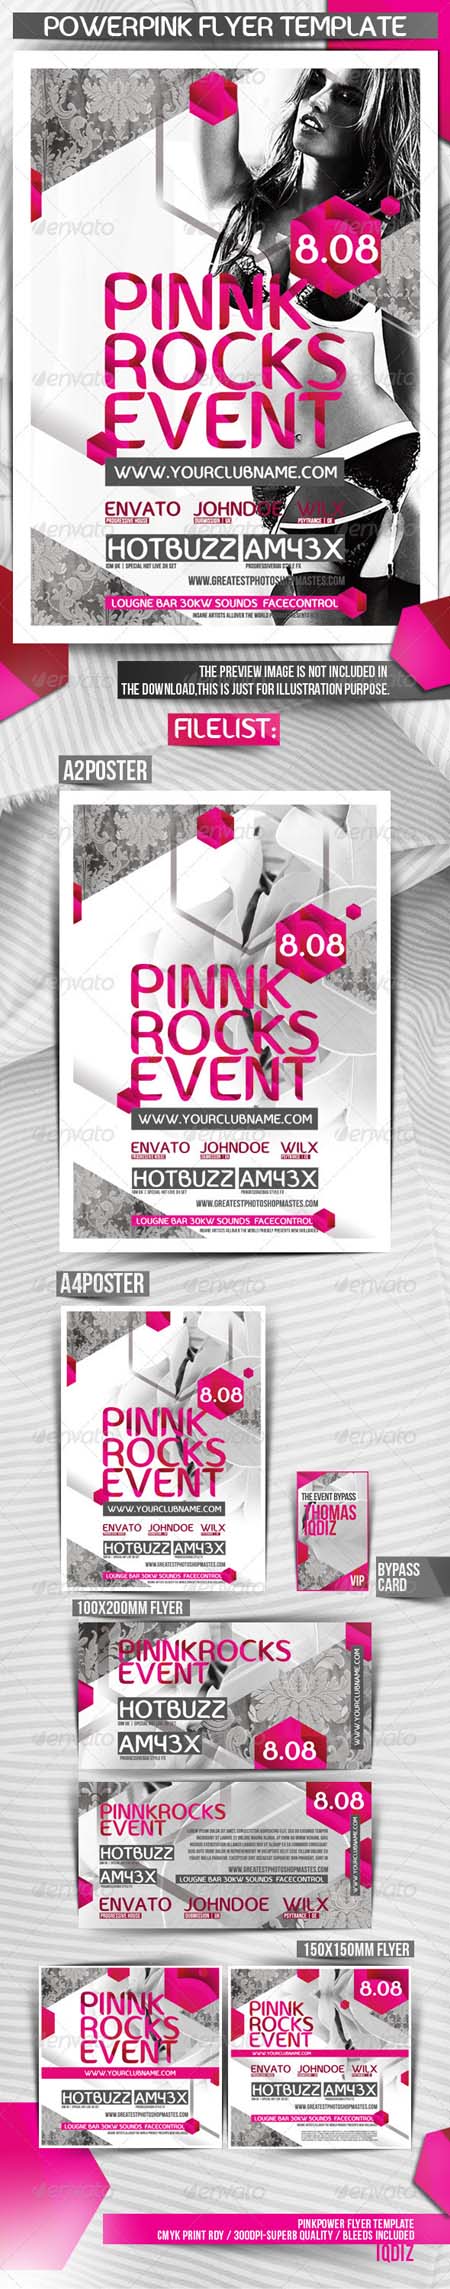 GraphicRiver Powerpink Party Flyer Template